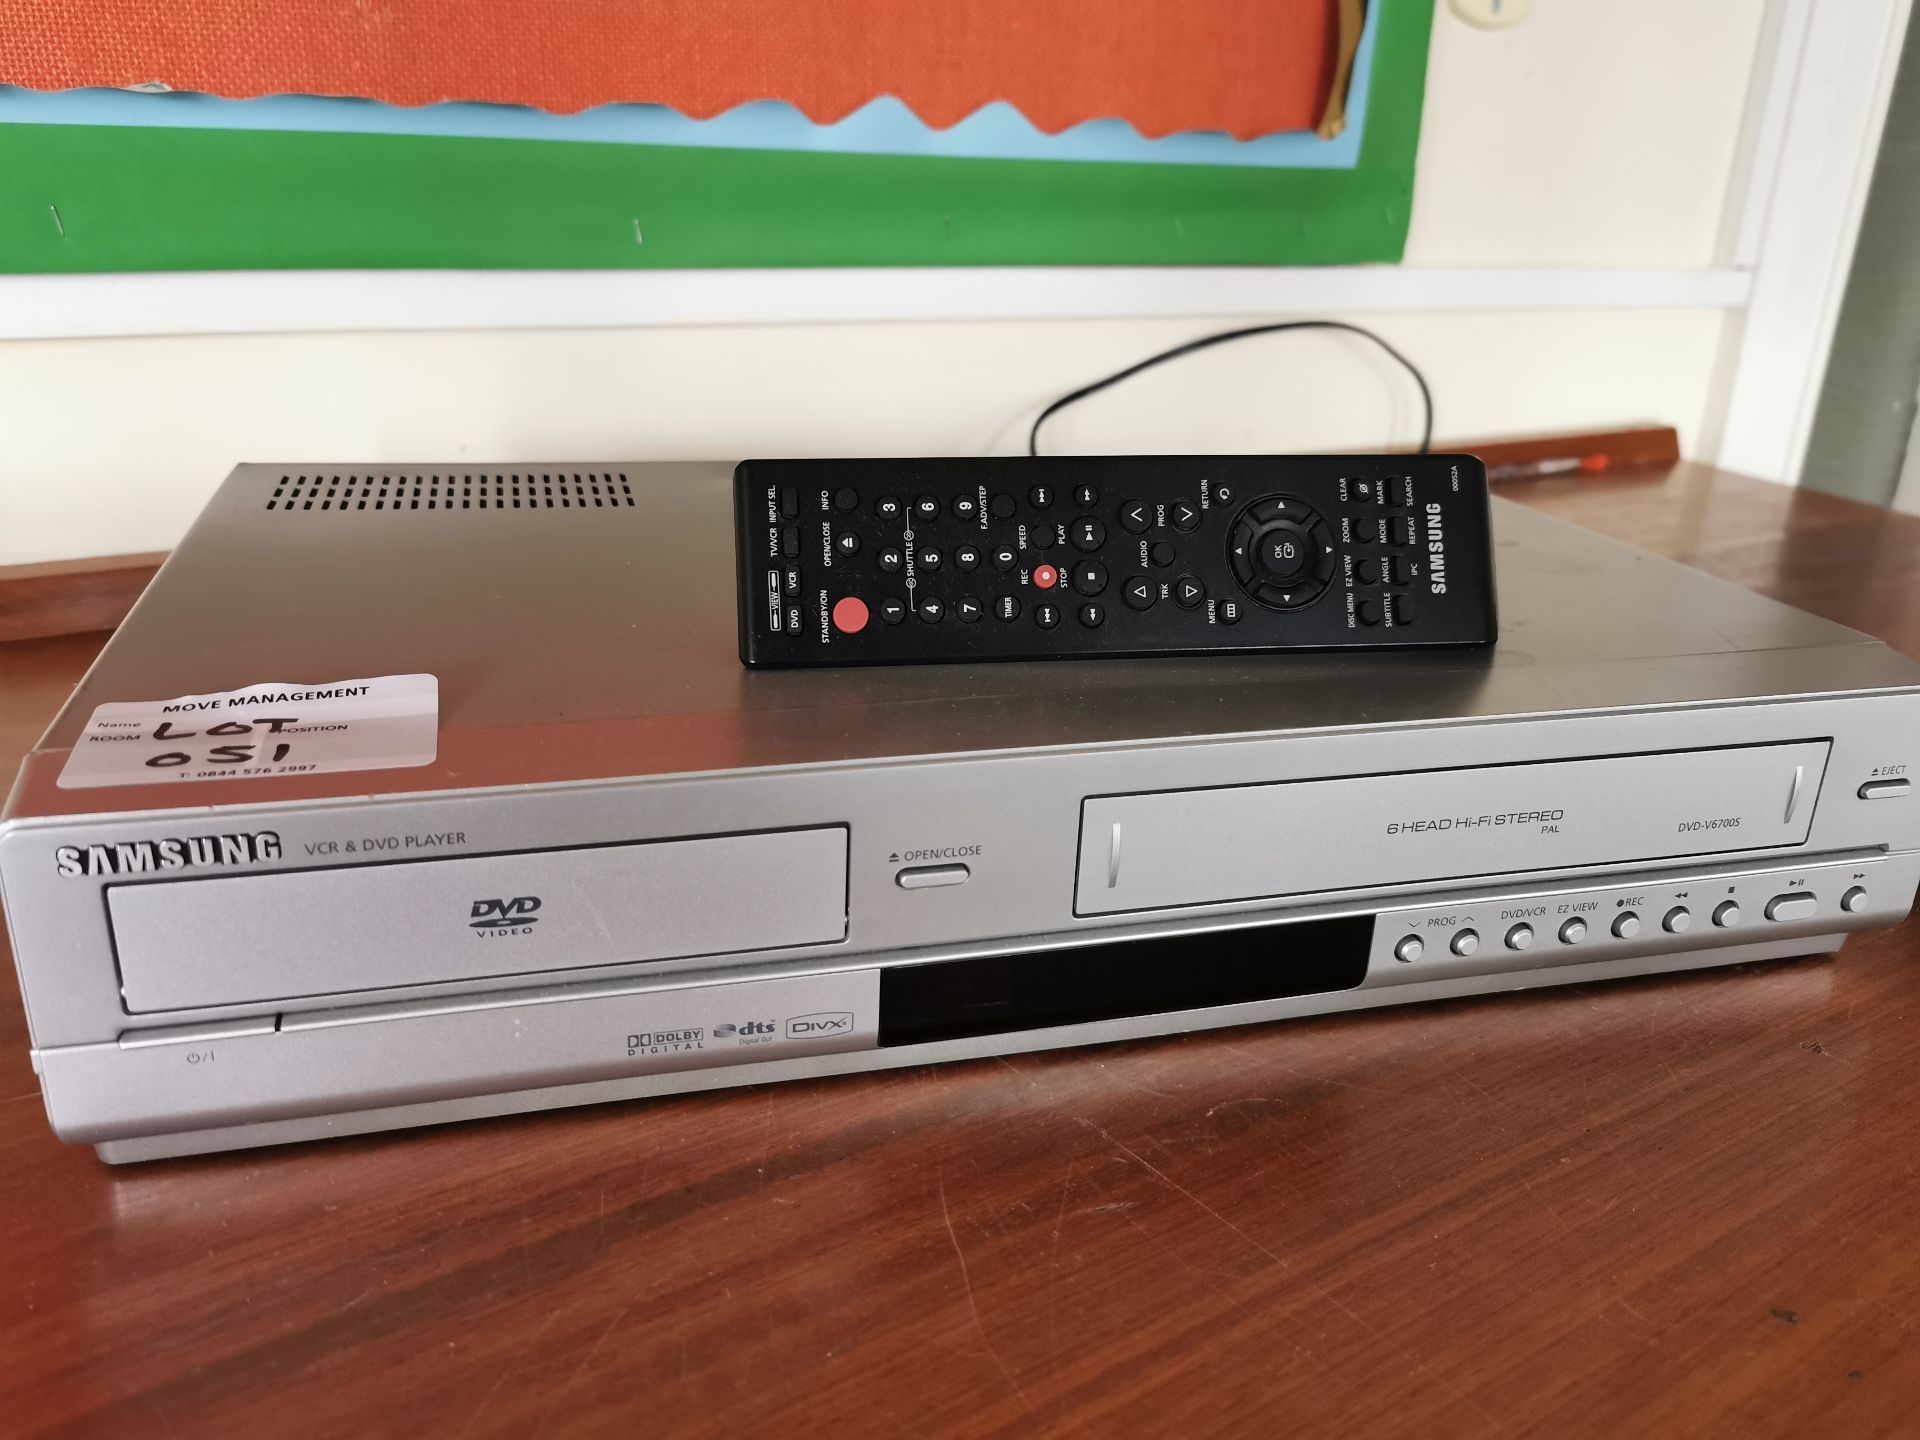 Samsung DVD and video player